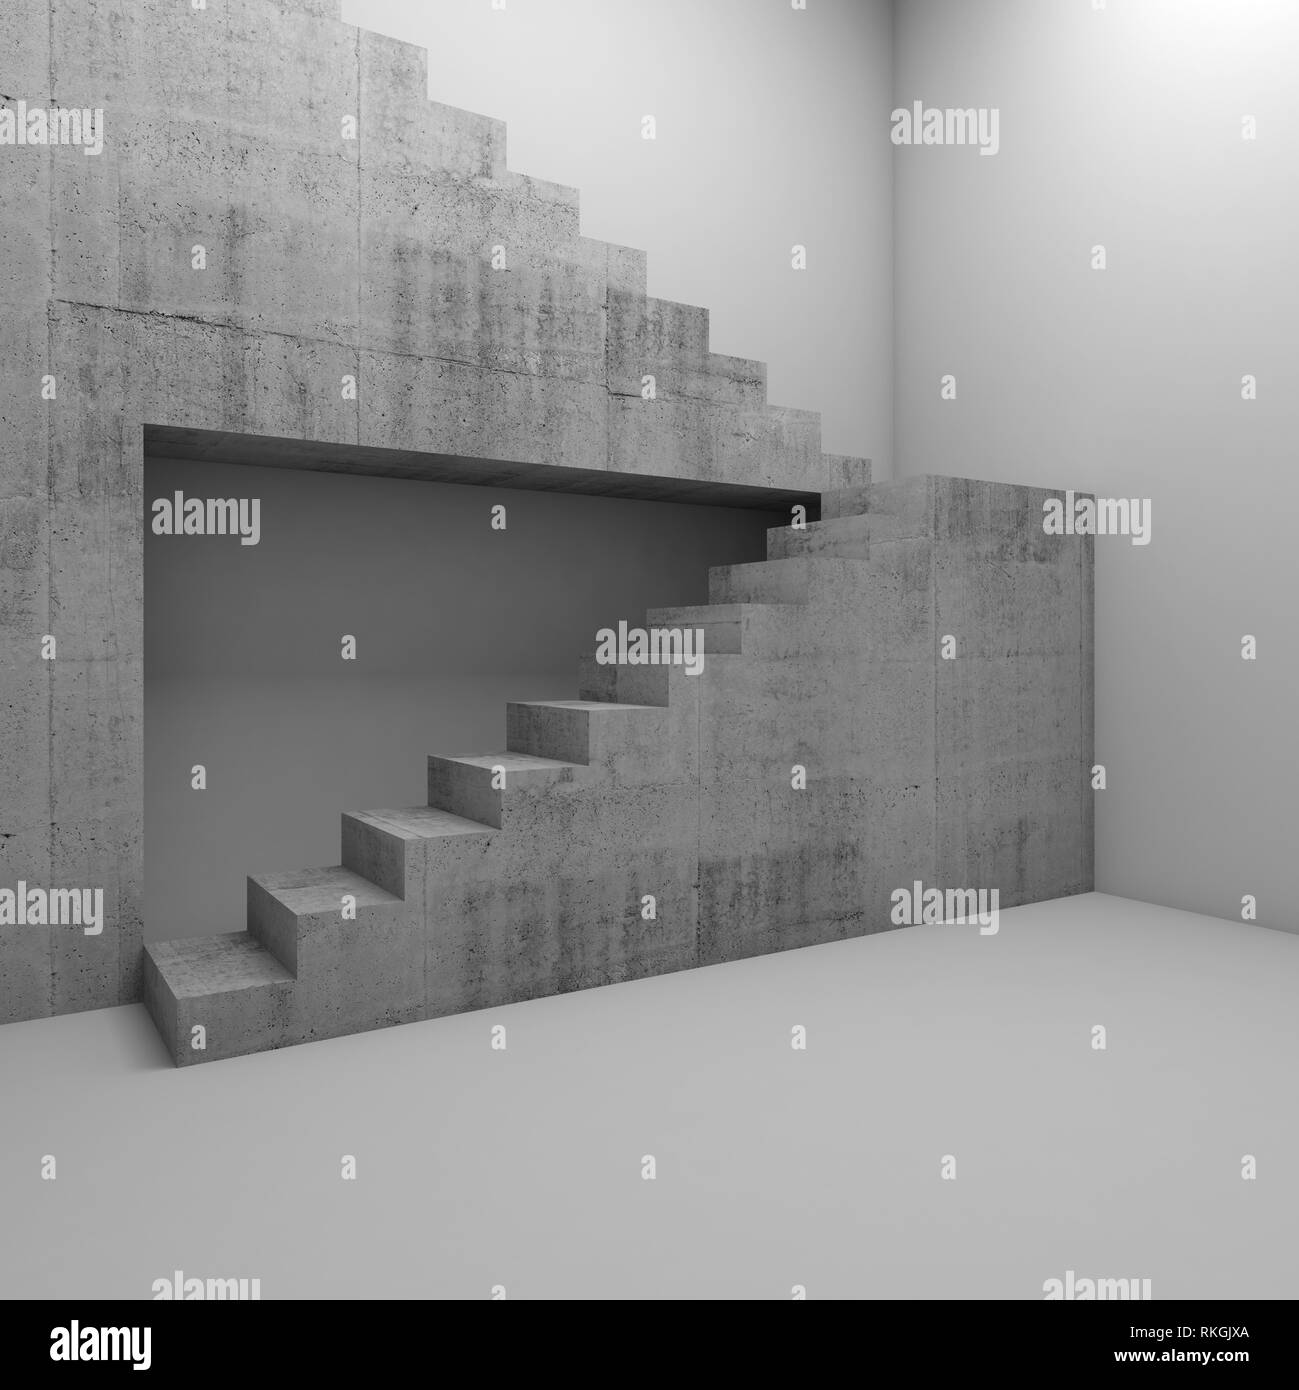 Concrete stairway installation in empty white room, abstract architectural background, 3d render illustration Stock Photo